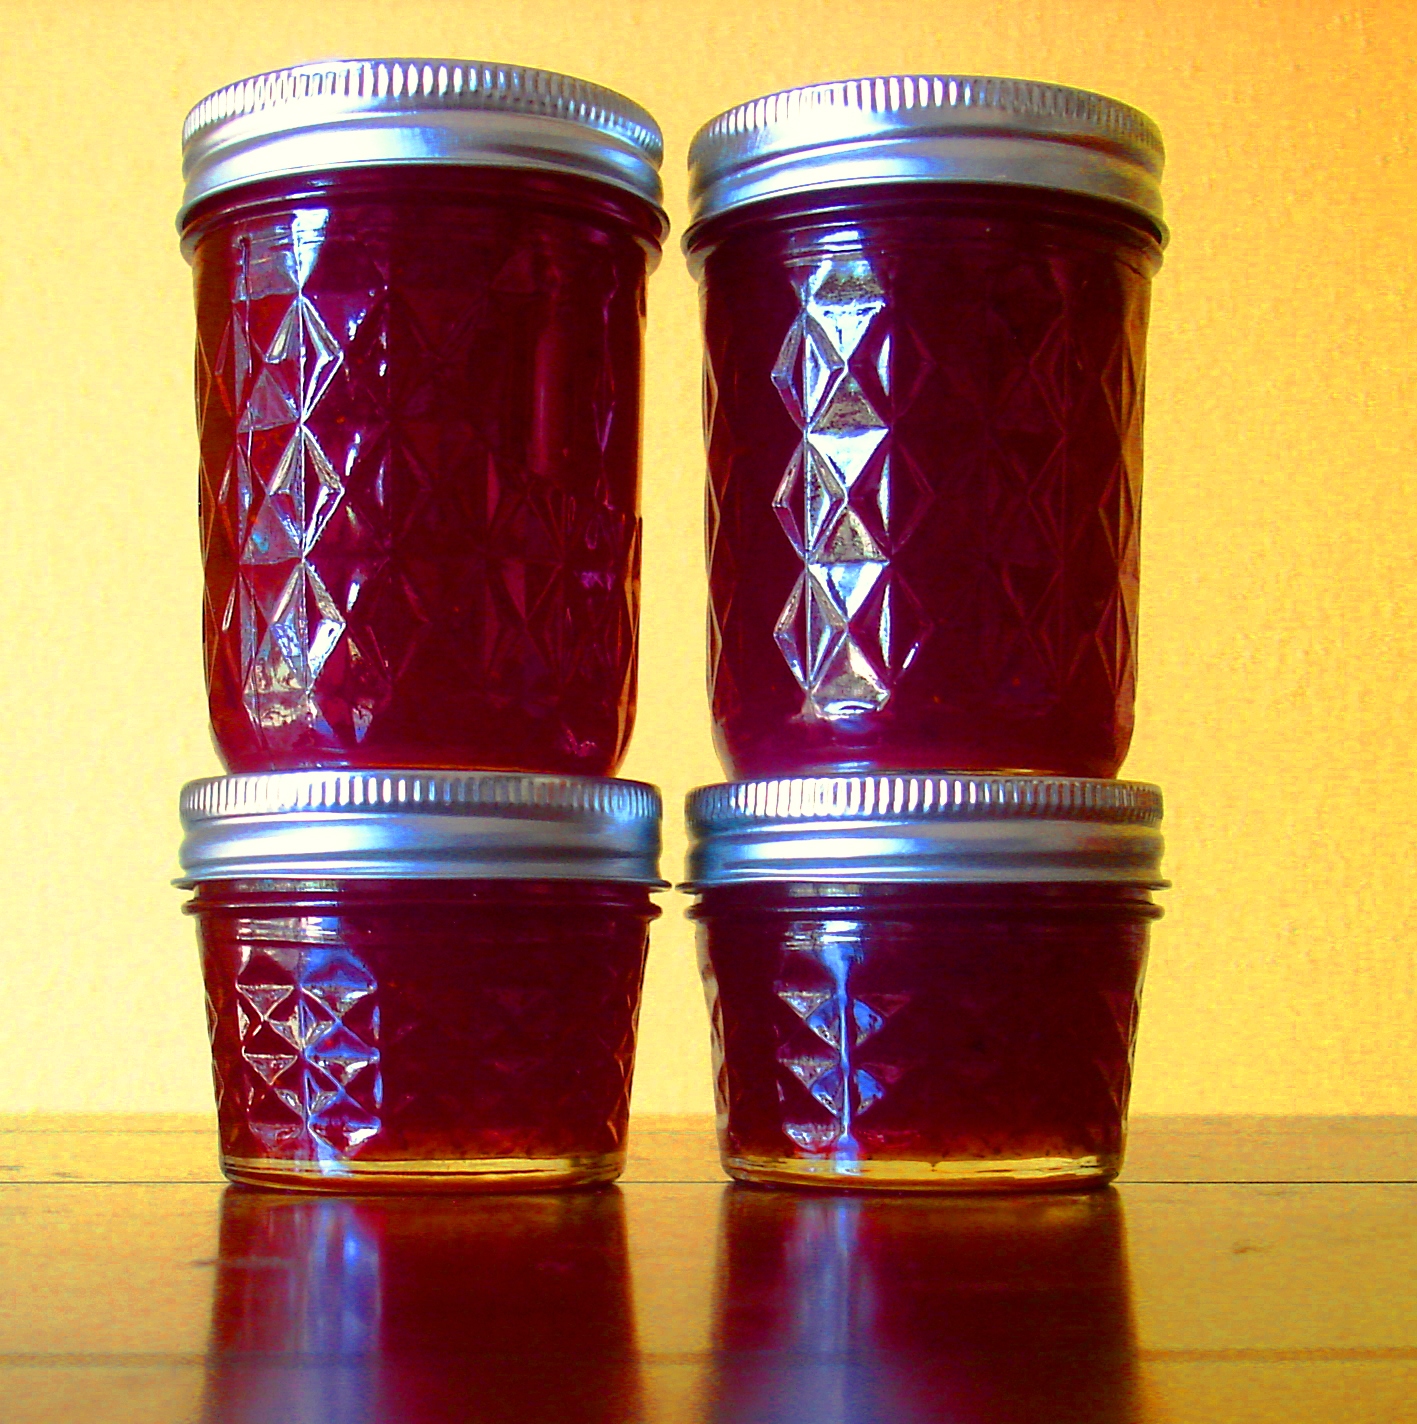 Cranberry Habanero Mustard Canning Tips, Canning Recipes, Condiment